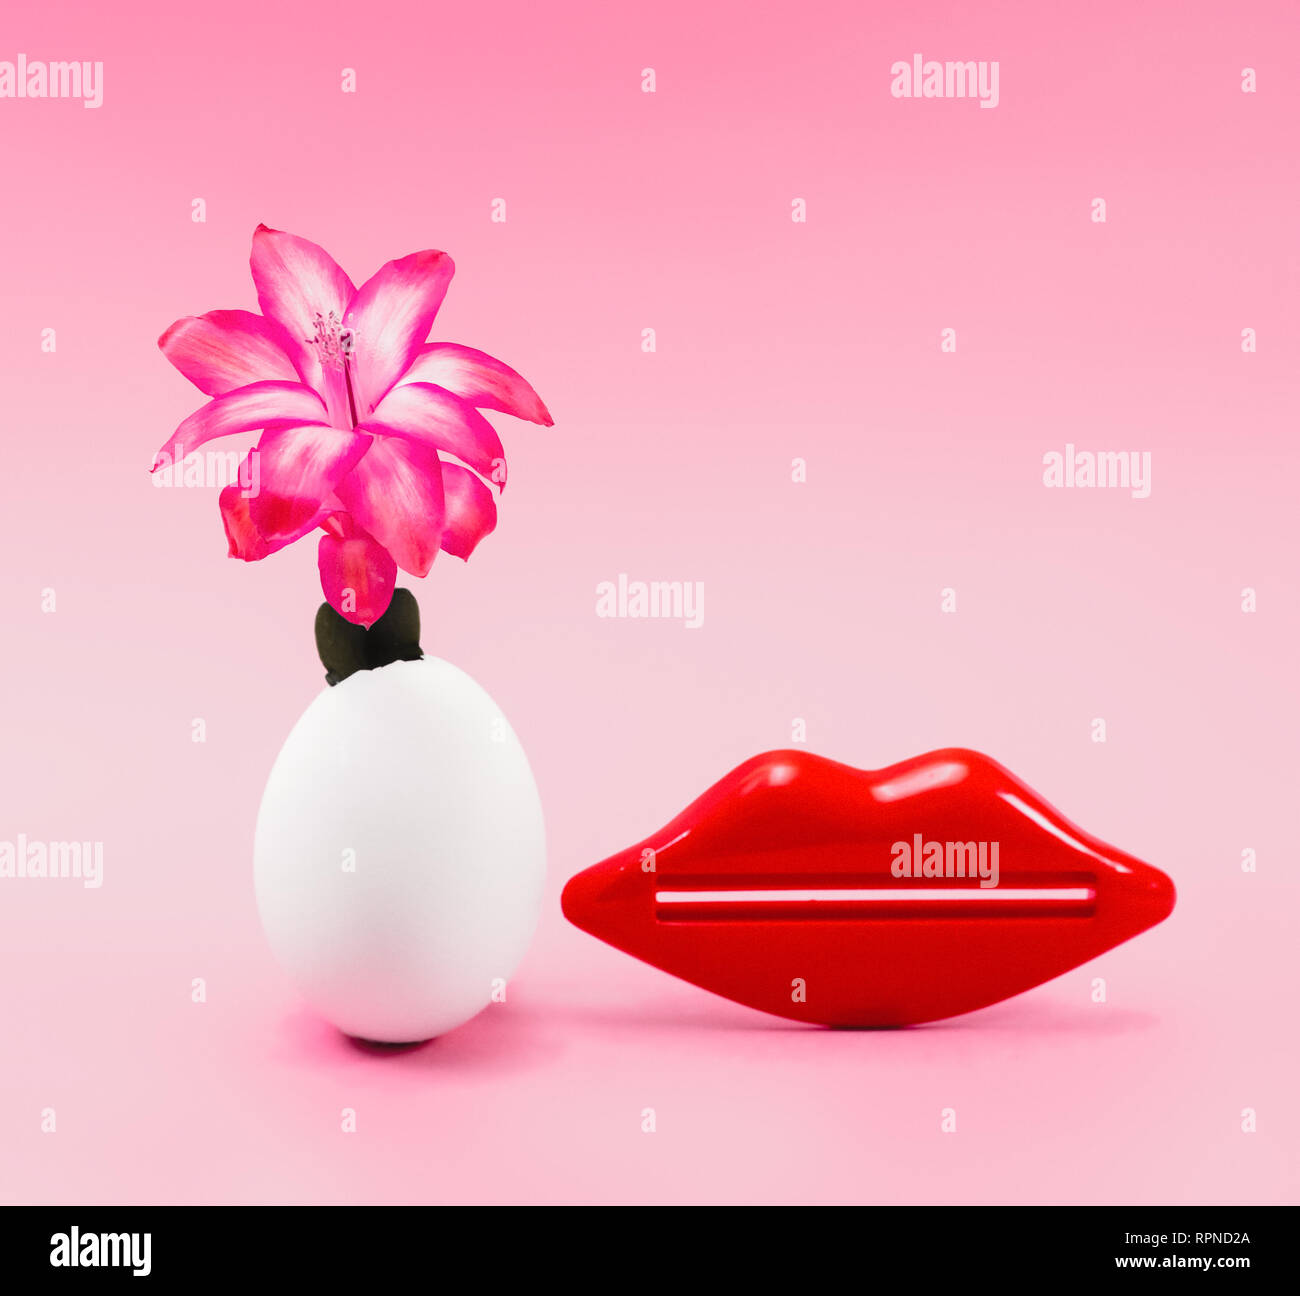 red flower growing in an egg shell concept. next to a red kiss from the lips. pink background Stock Photo